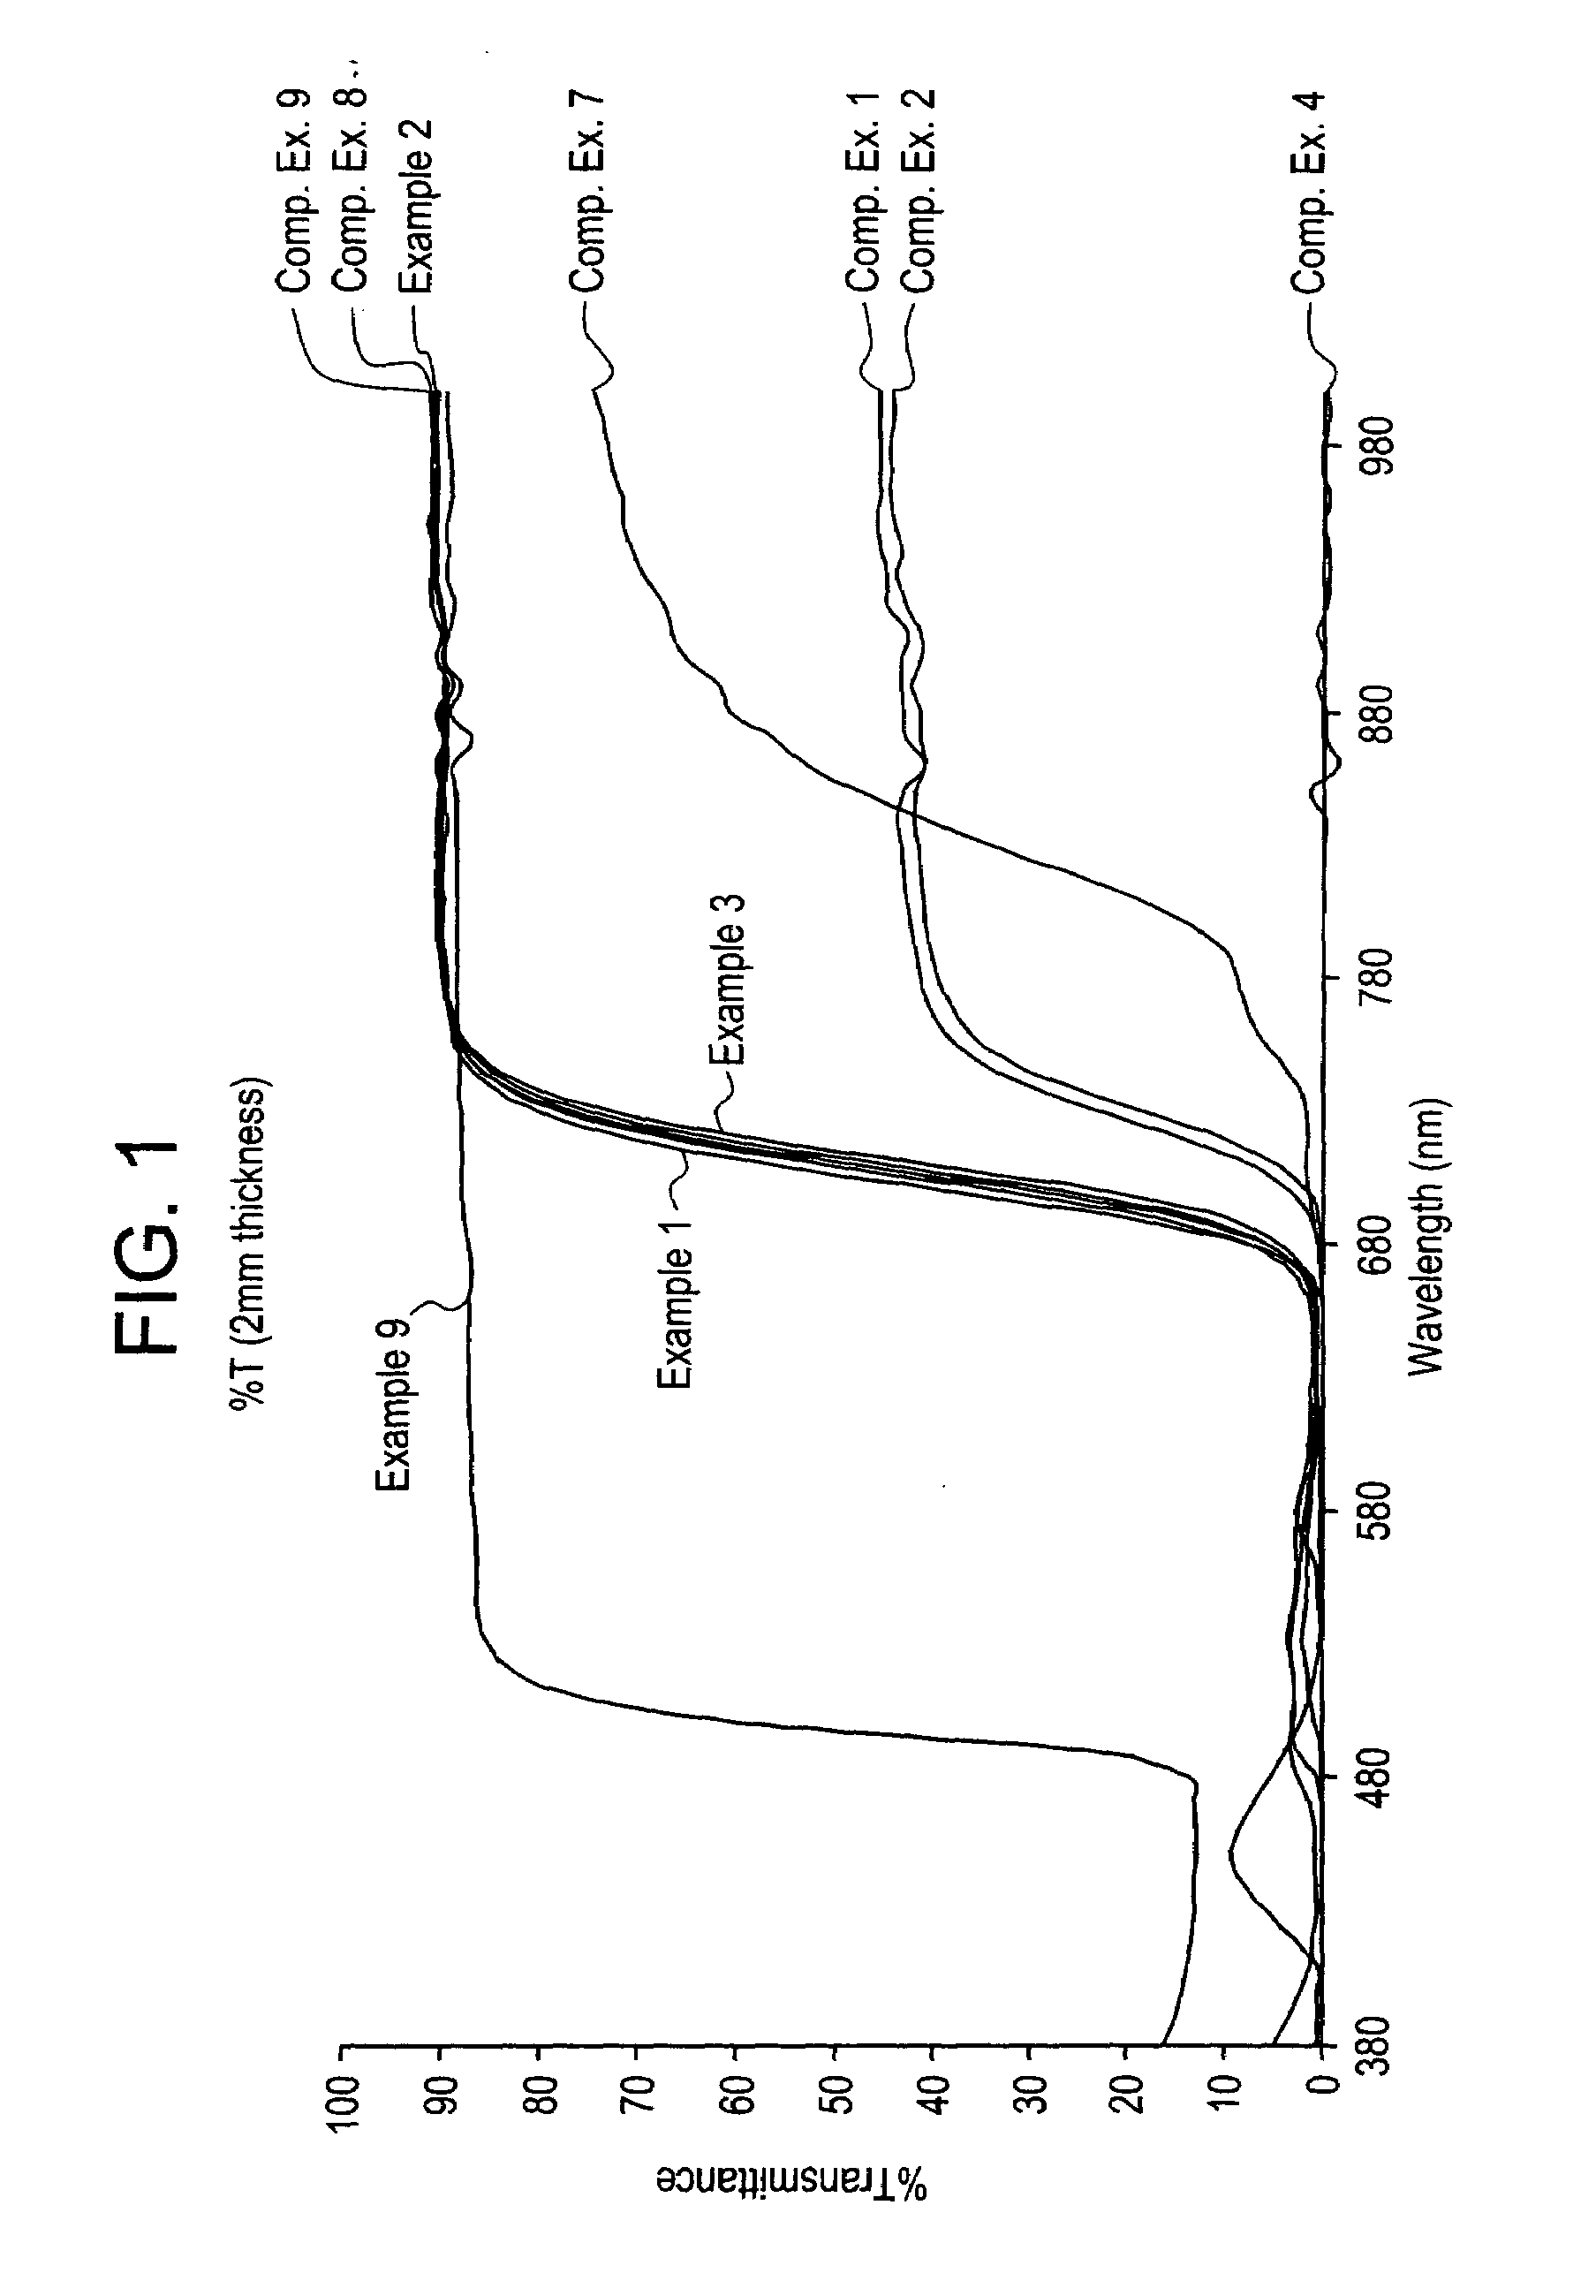 Infrared transmissive thermoplastic composition, and articles formed therefrom